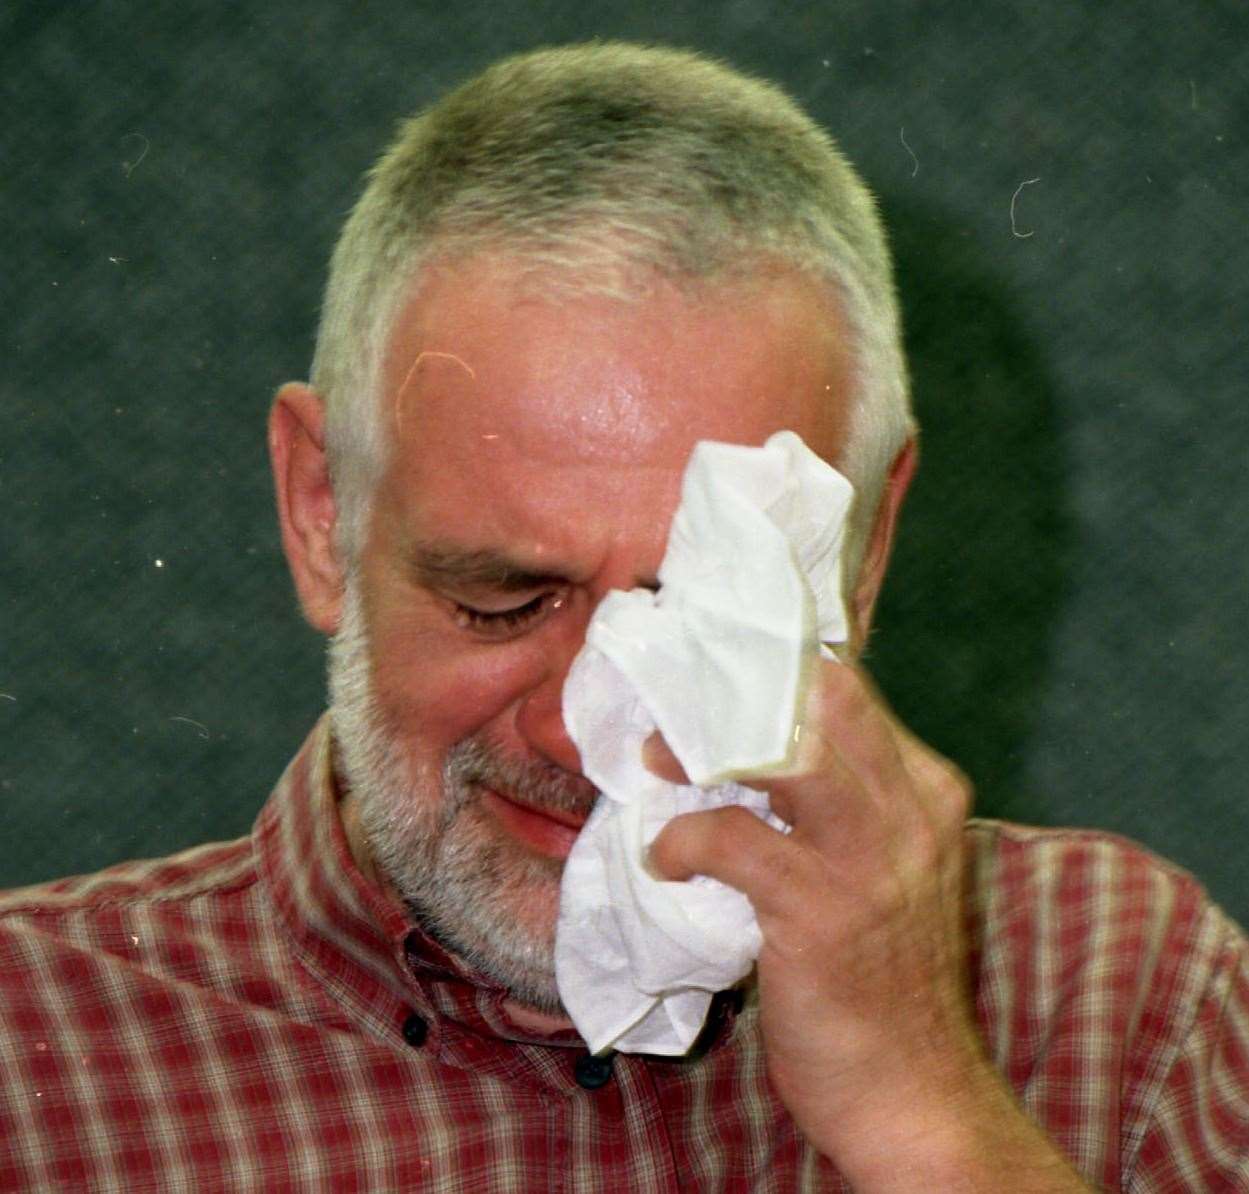 Peter Streader, the father of Claire Streader, fight back tears during a police appeal for information